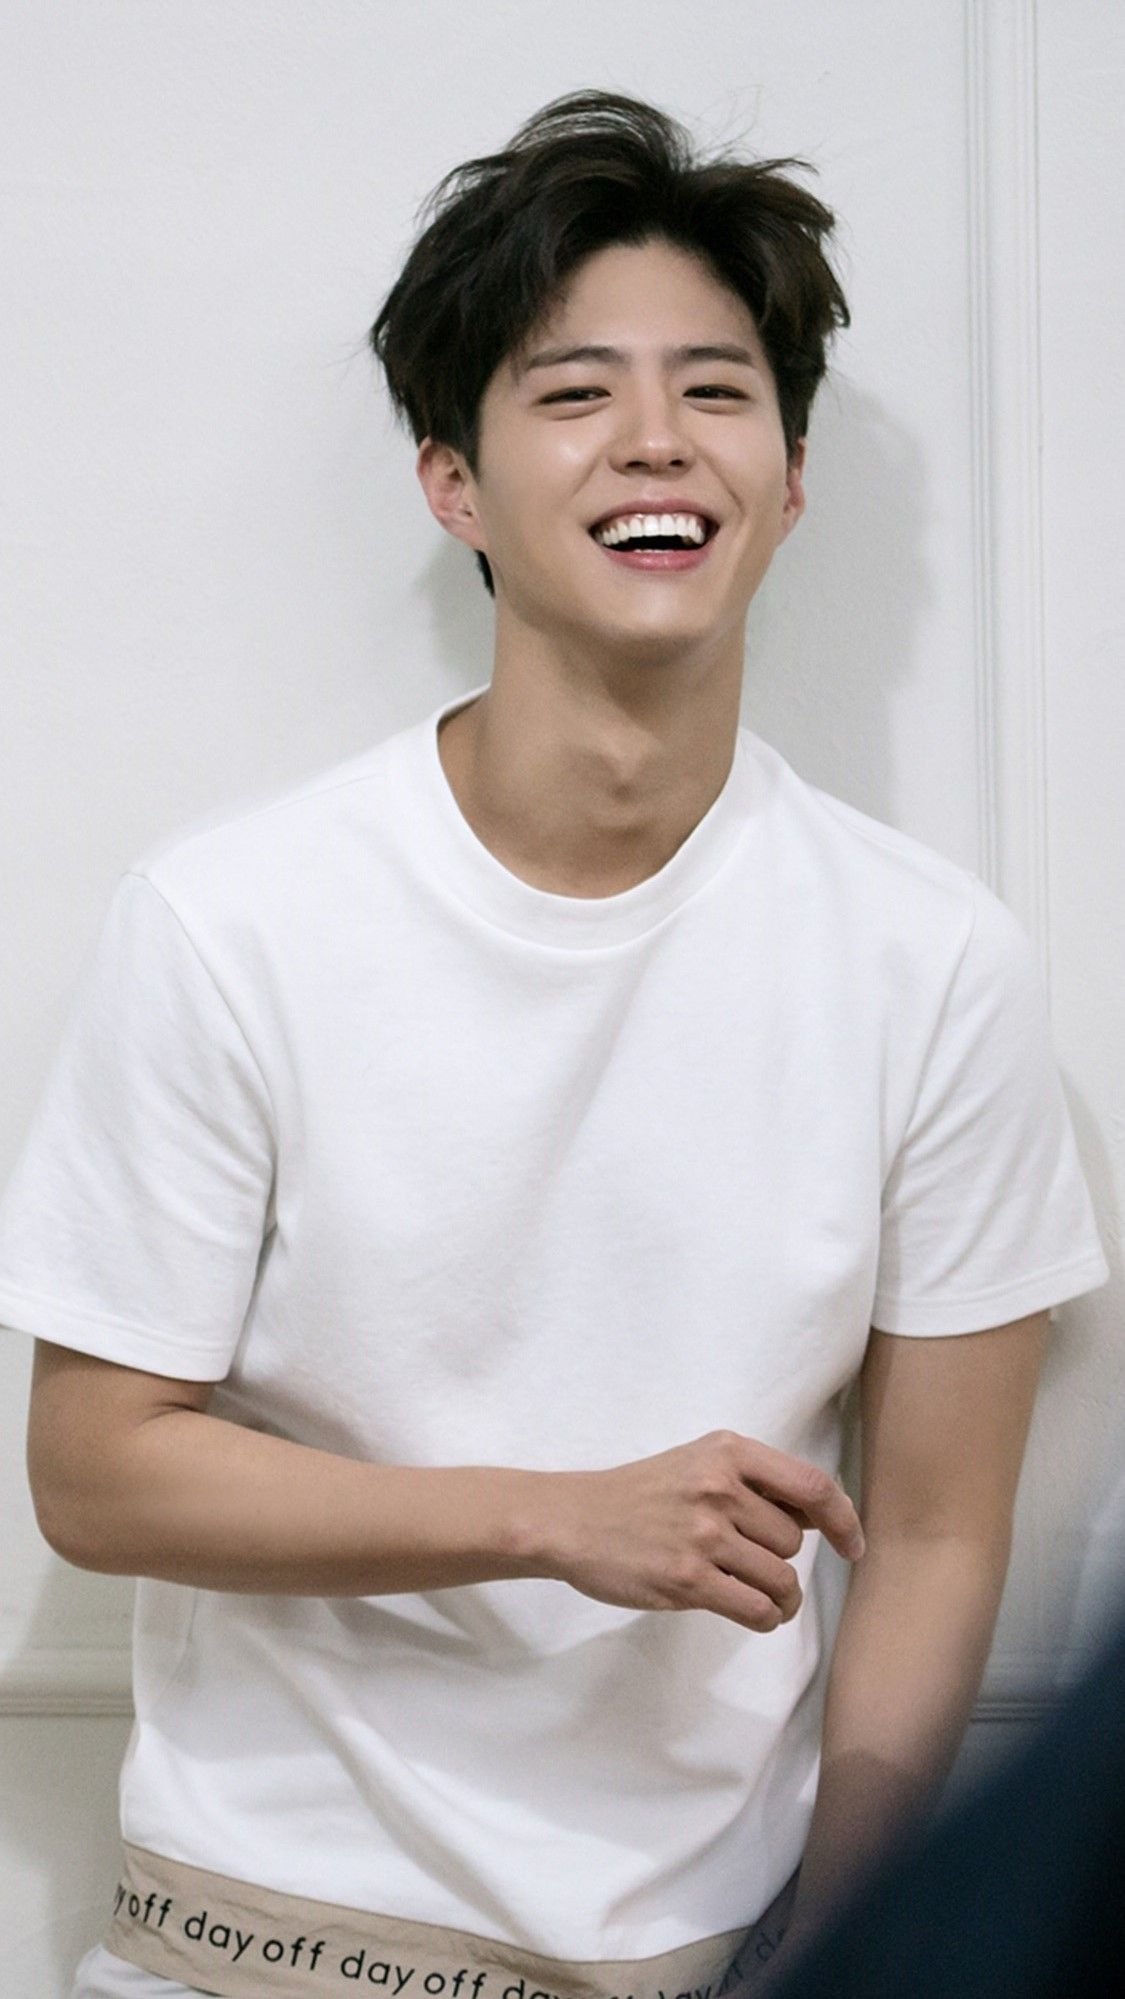 kdrama tweets on X: Happiest Birthday to the man with the cutest smile, Park  Bo Gum Thank you for always making my day with your smile and existence.  Will forever love the